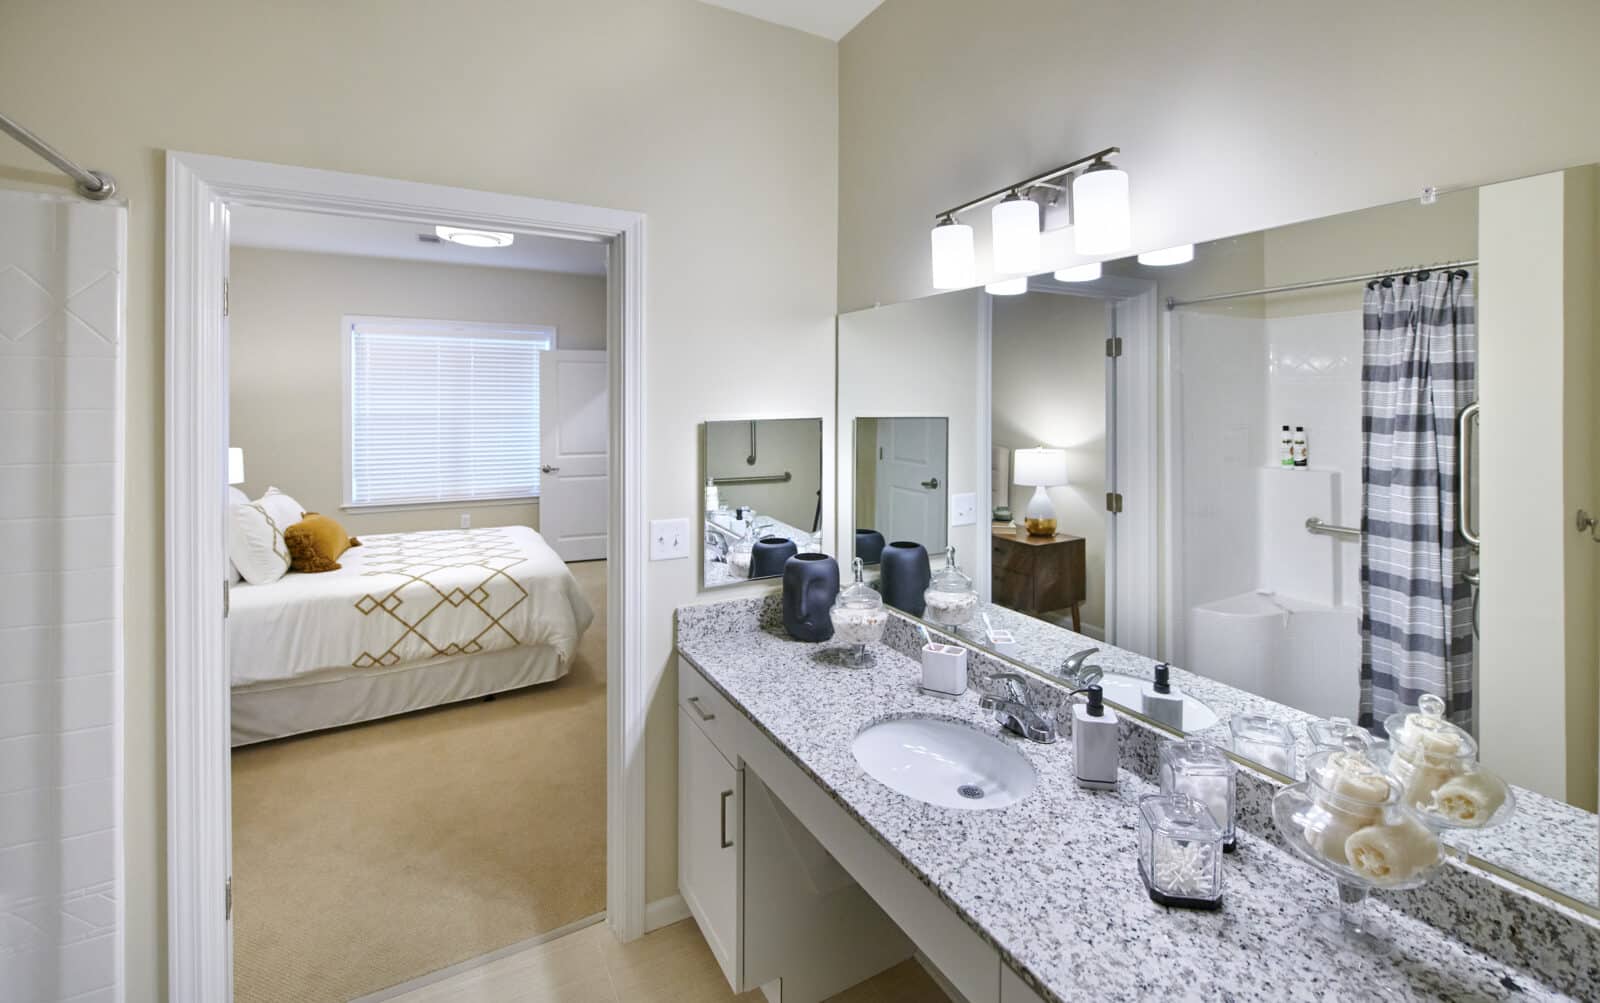 bathroom vanity with mirror; blue and white shower curtain with walk-in shower, next to bedroom with white bed cover and beige carpet